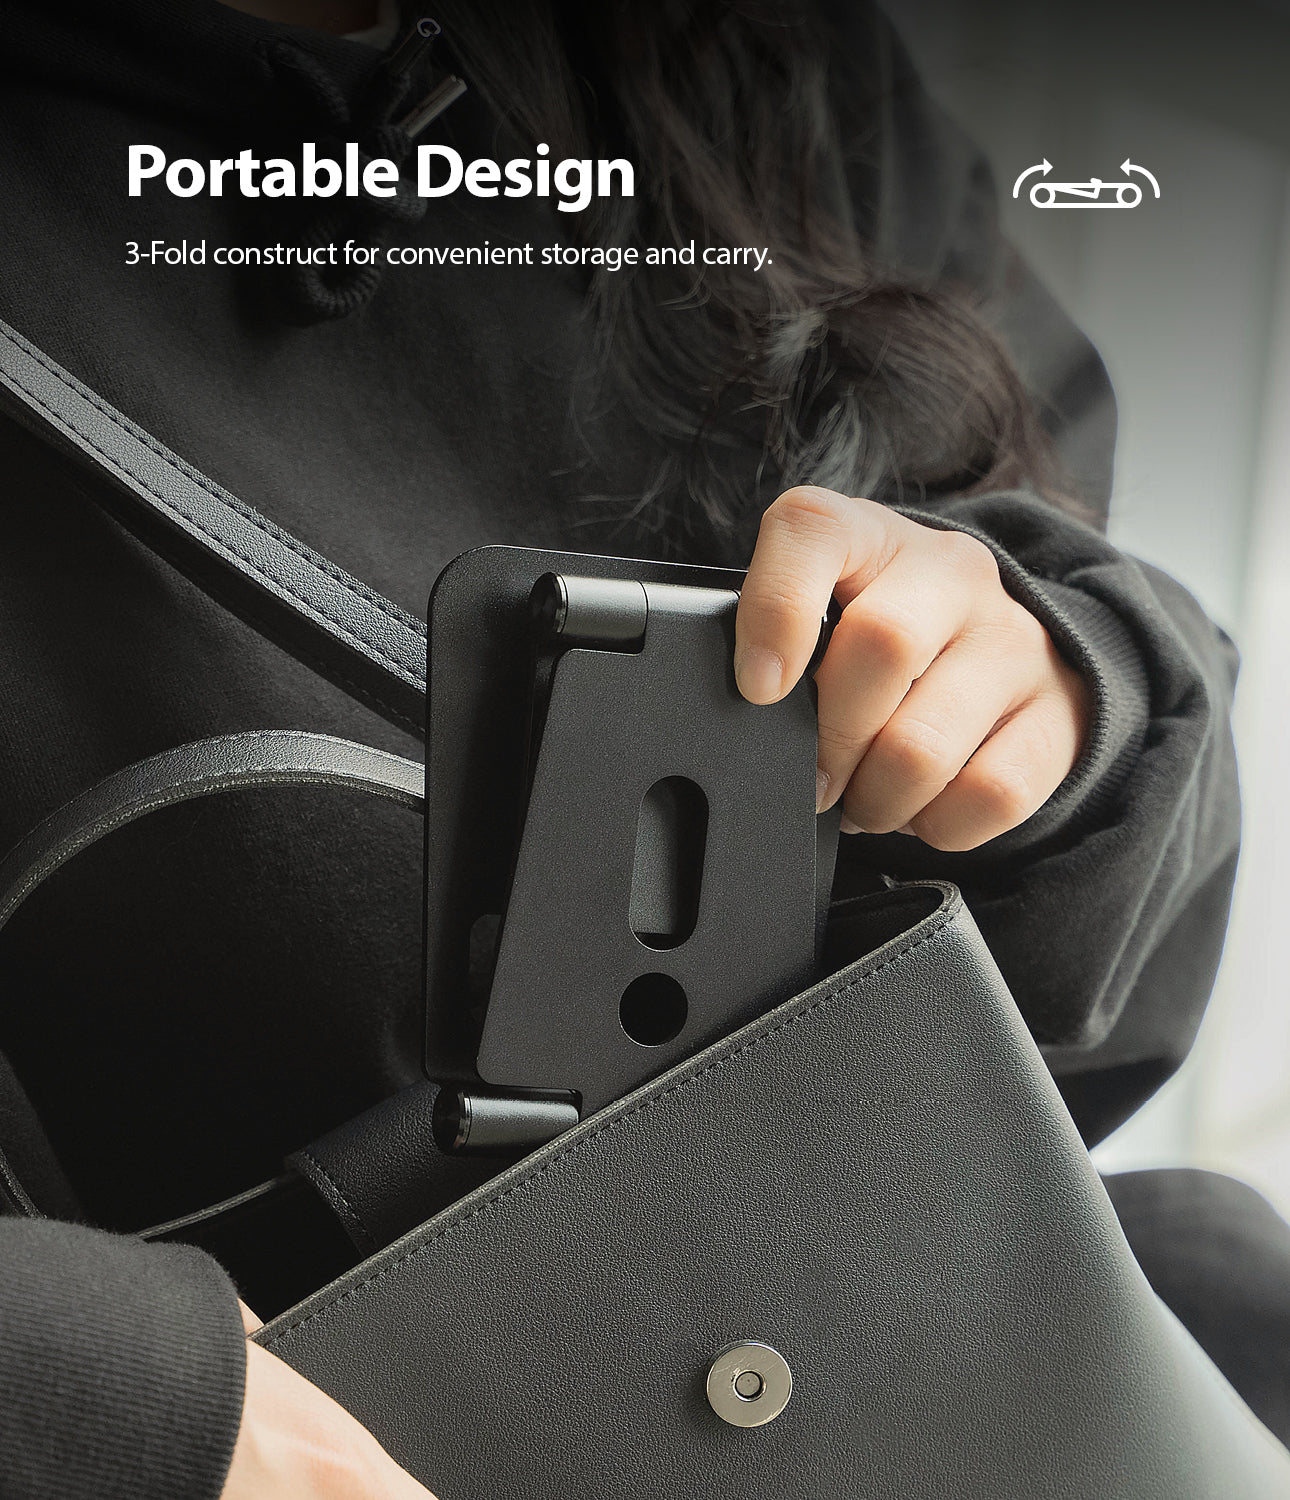 protable design provided with a slim profile